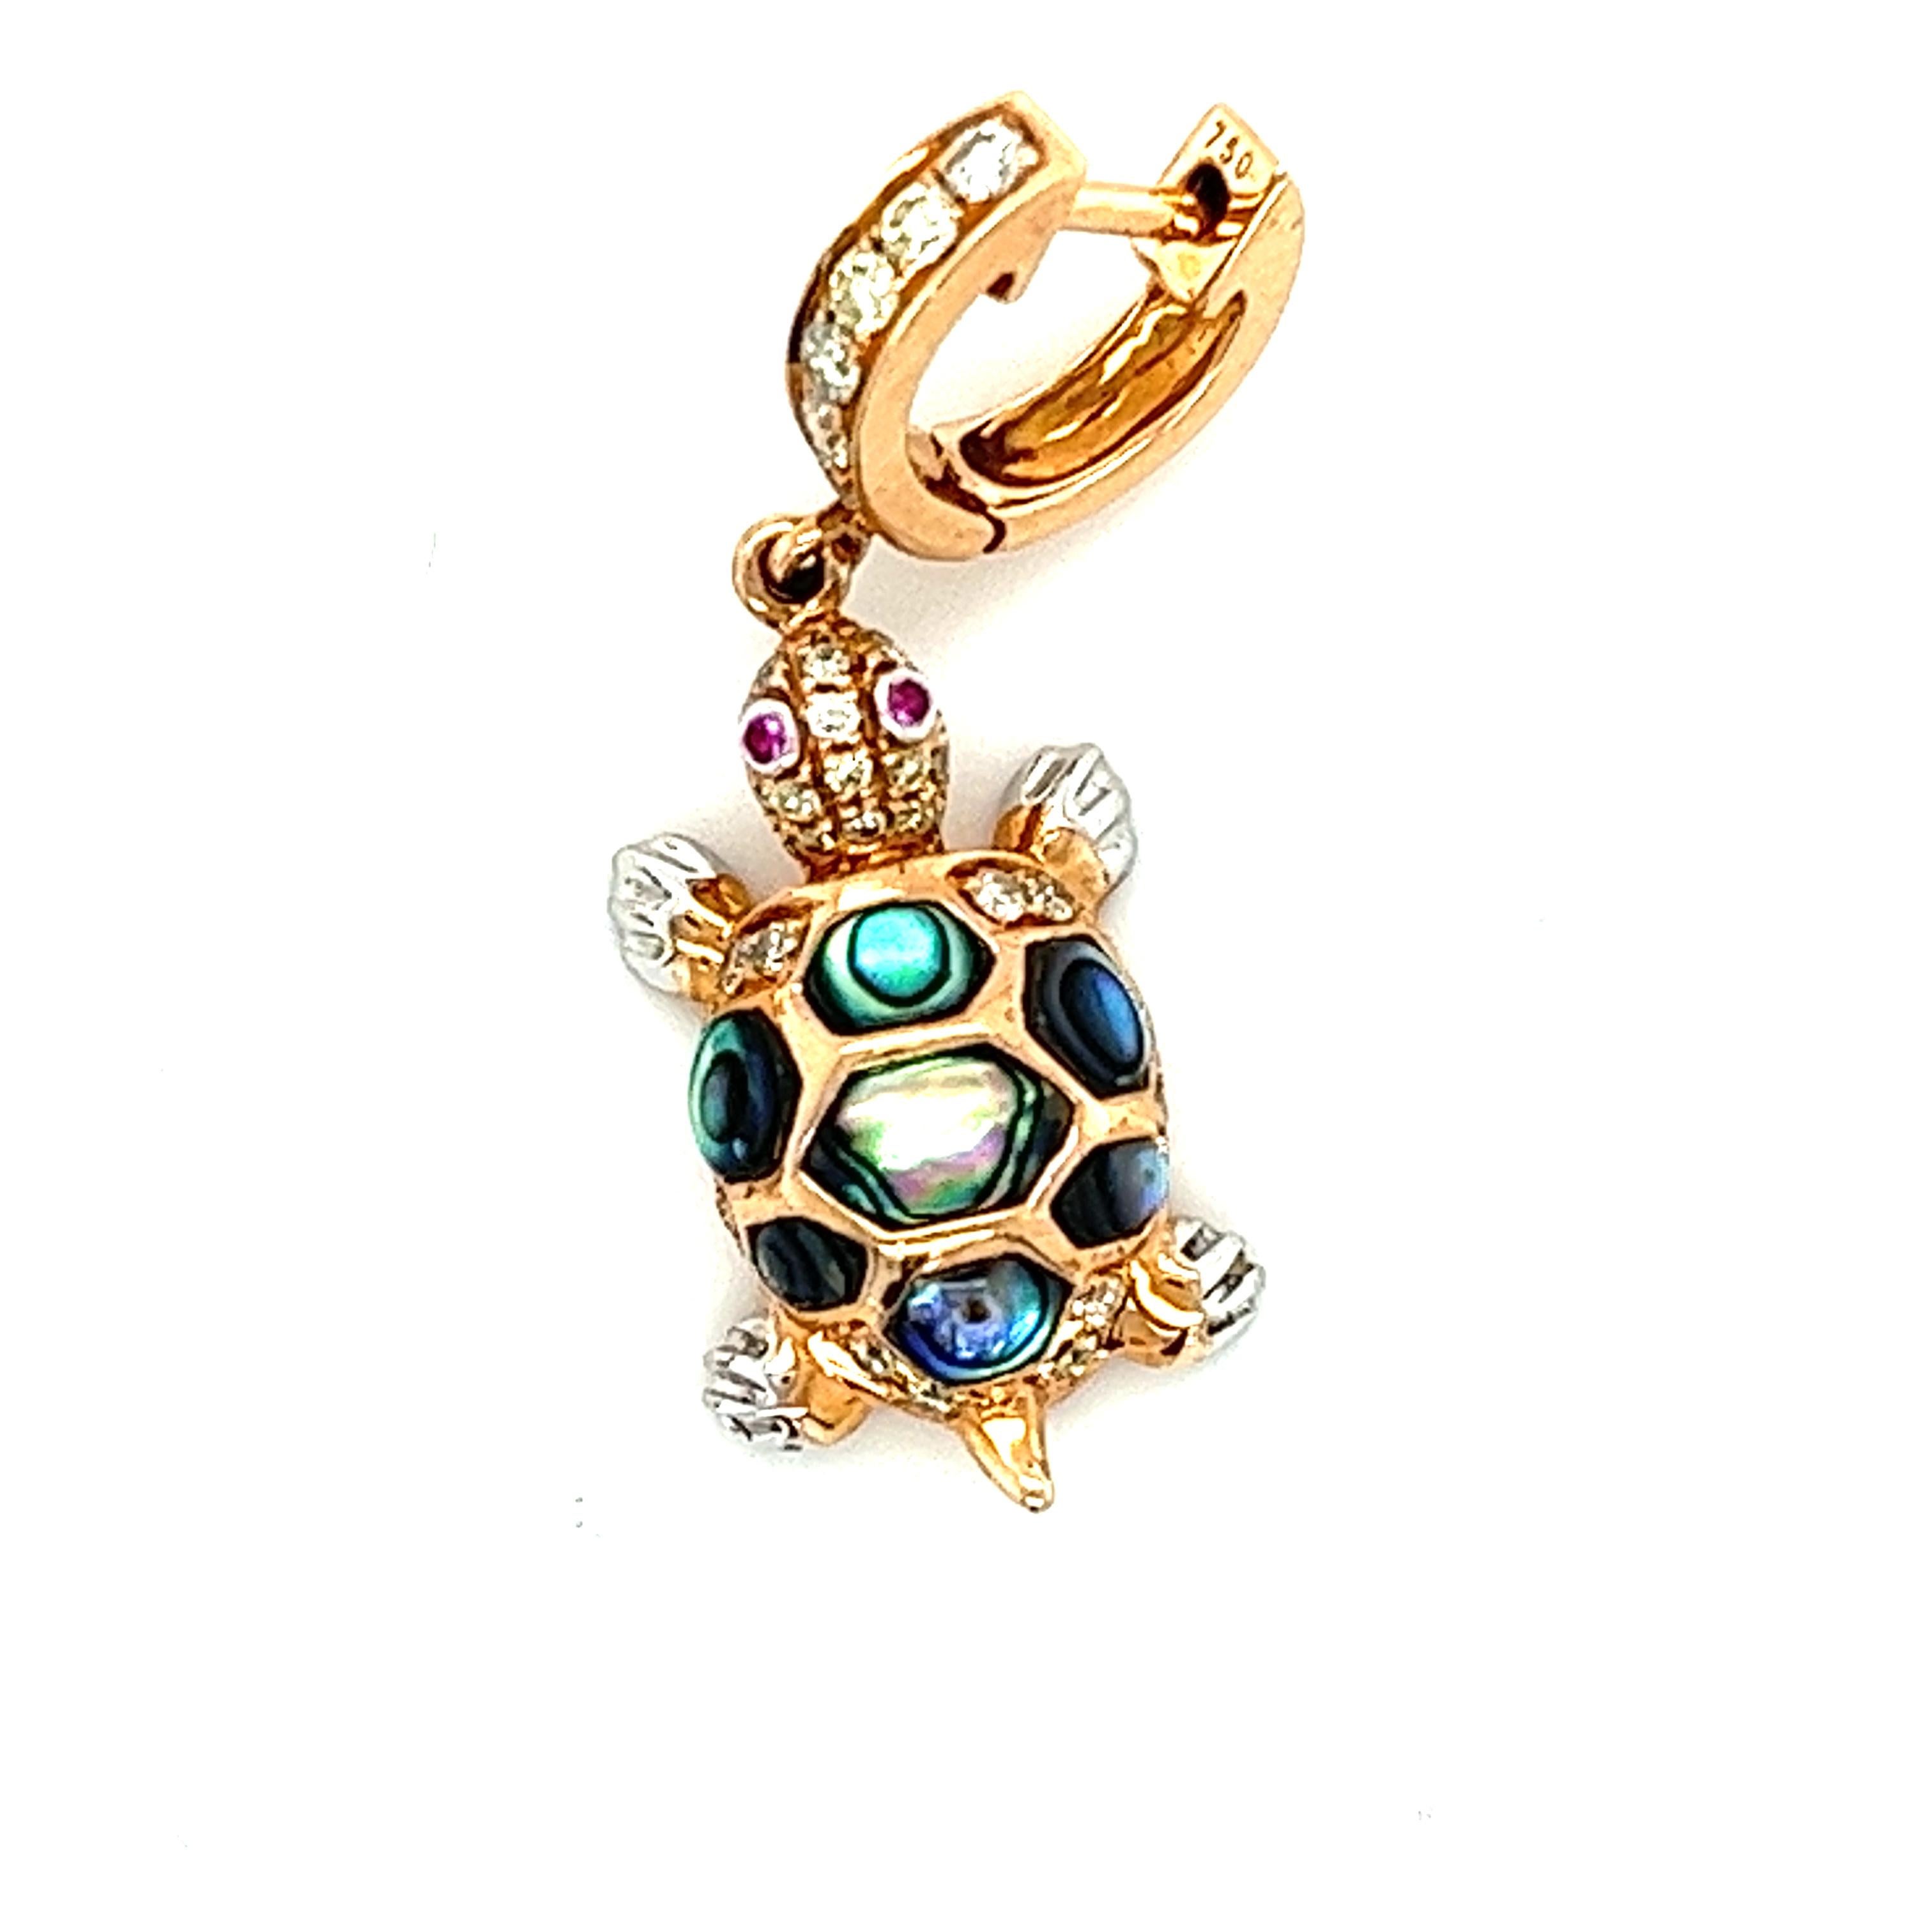 18K Rose Gold Abalone Shell Tortoise Earring

14 Abalone Shells 1.04 CT
66 Fancy Diamonds 0.56 CT
4 Rubies 0.02 CT
18 K Rose Gold 6.99 GM

Abalone Shells are Ocean's masterpieces.
This 18K Rose Gold Abalone Shell Tortoise Earring allows you to own a